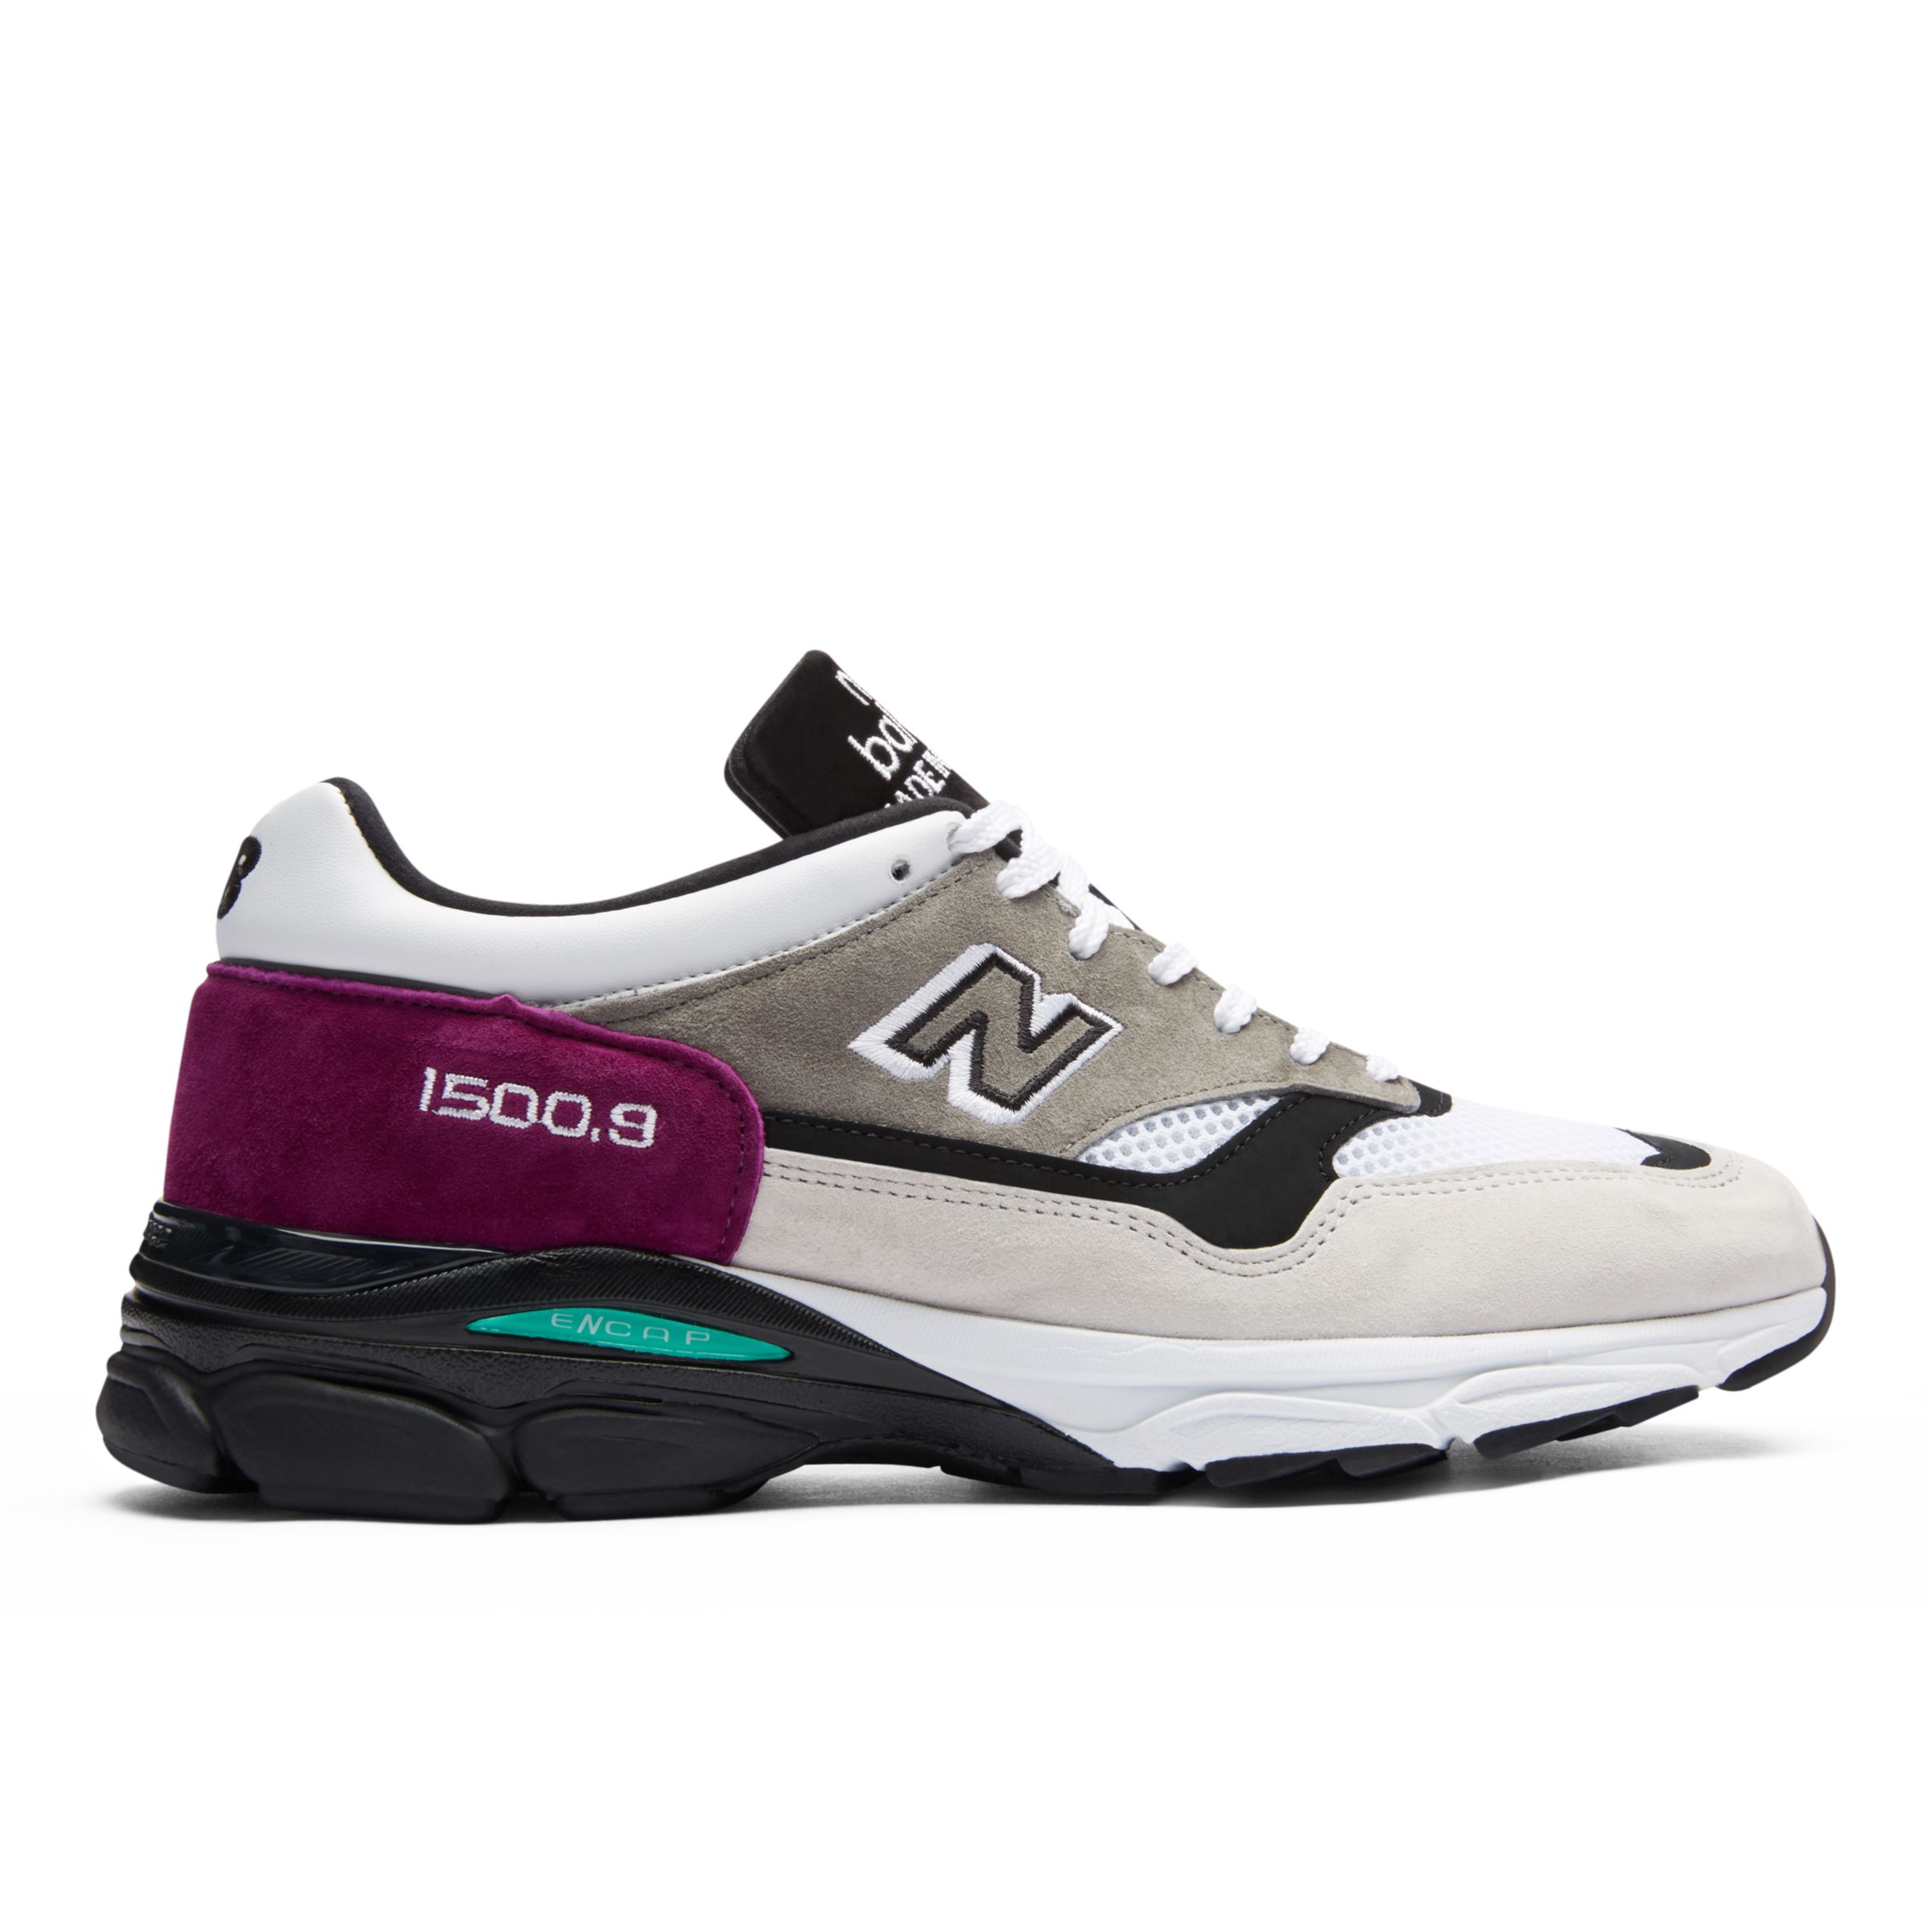 new balance 1500.9 made in uk